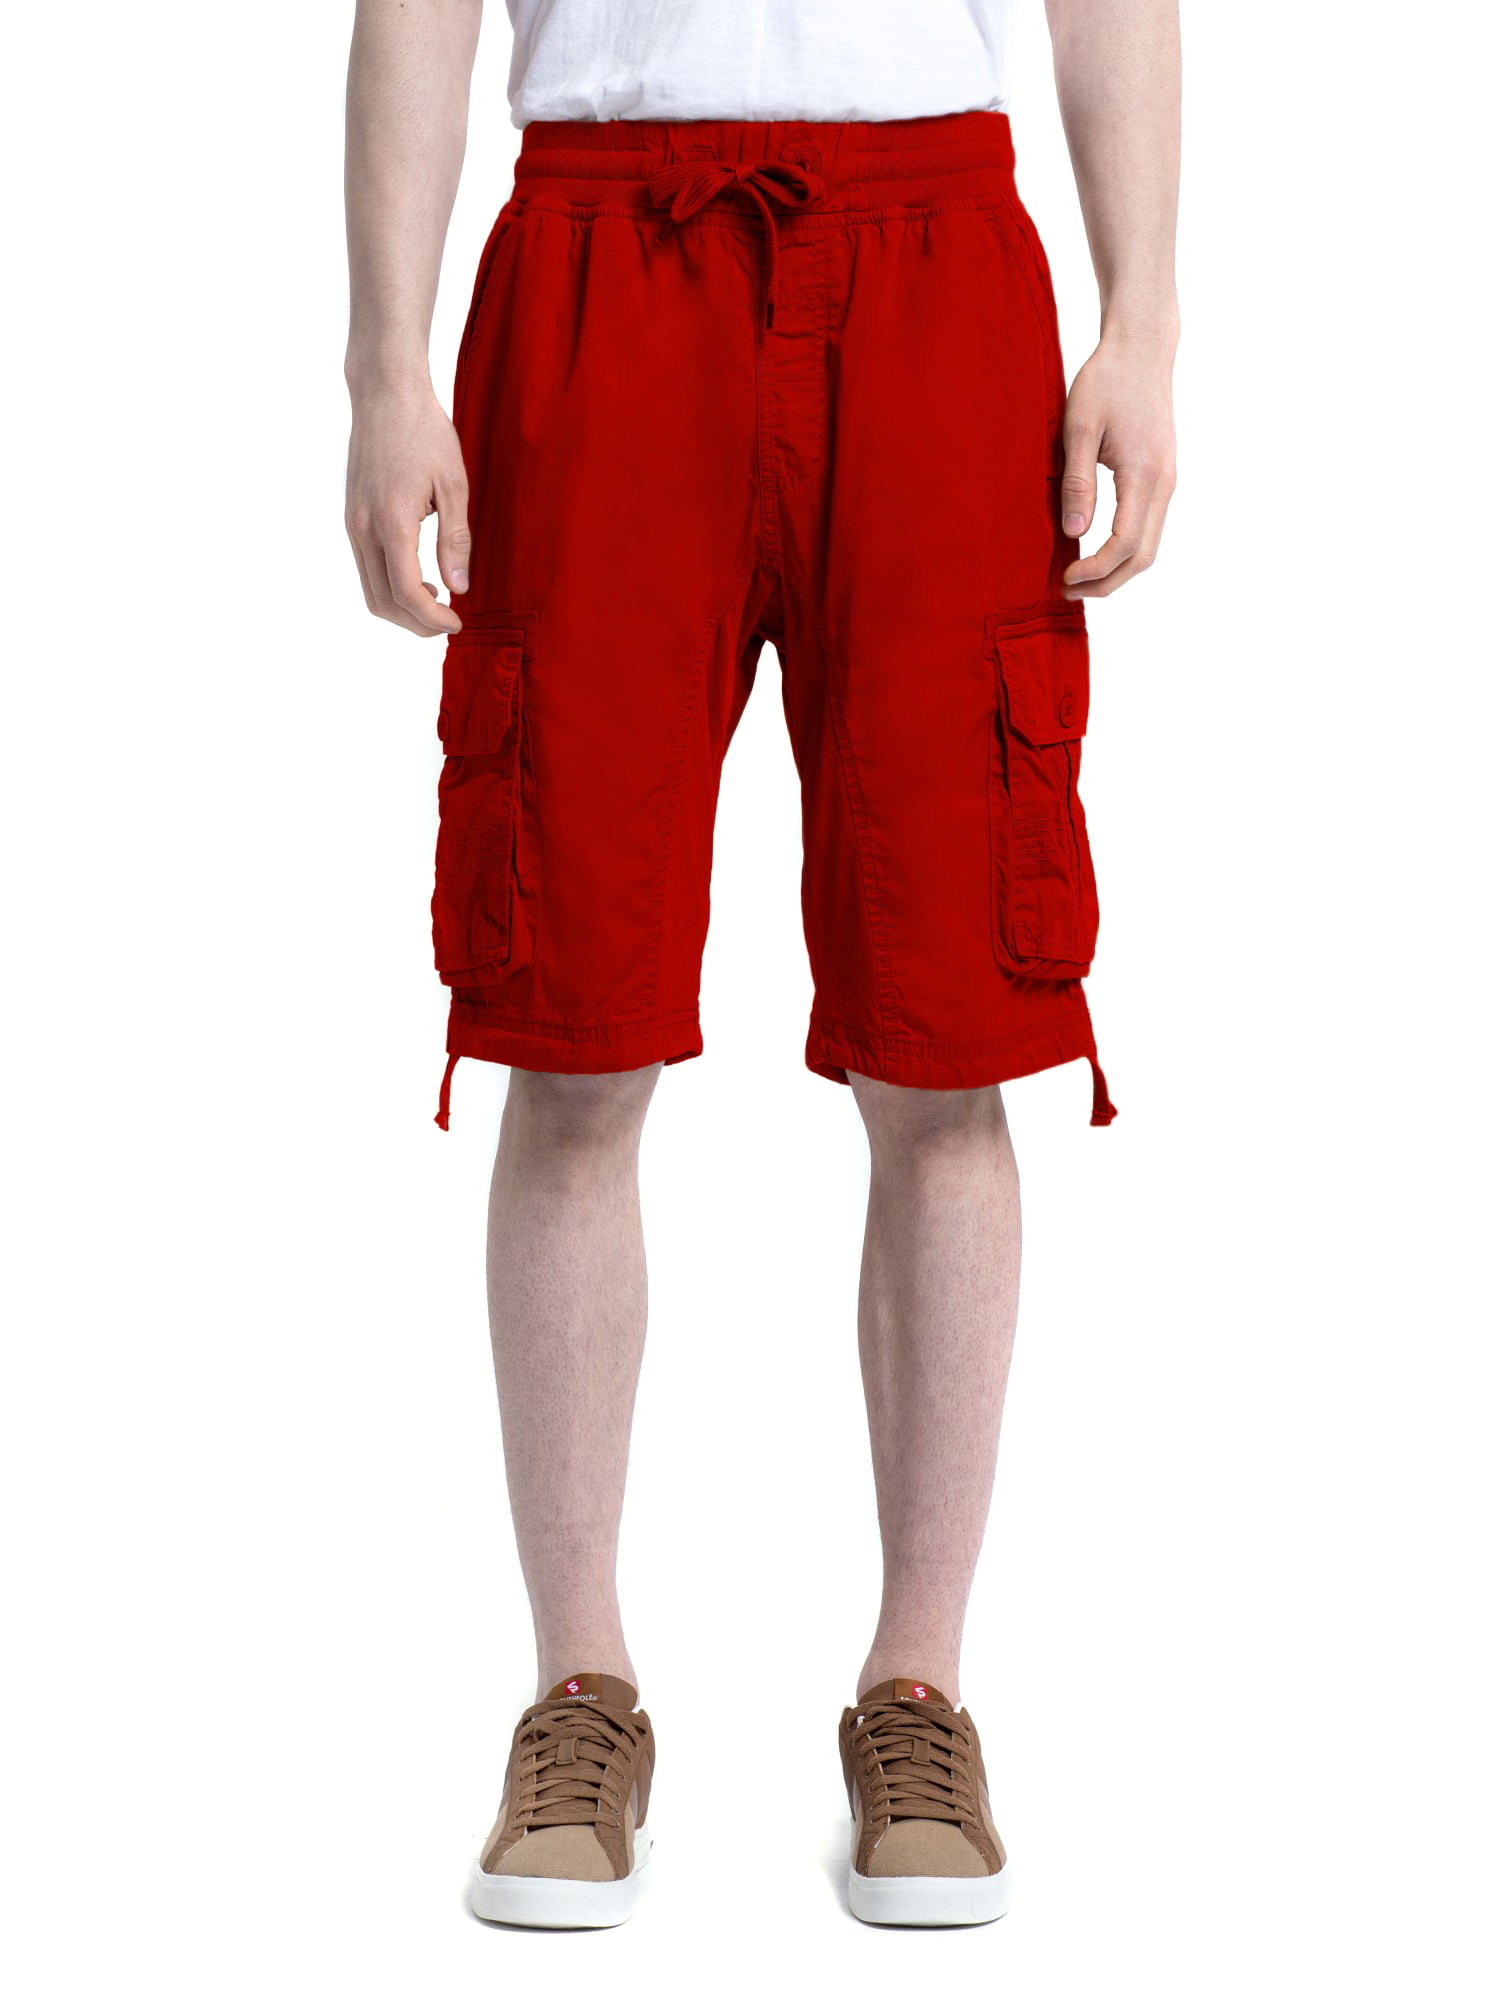 Southpole Boys Big Jogger Shorts in Basic Solid Colors and Fleece Fabric 